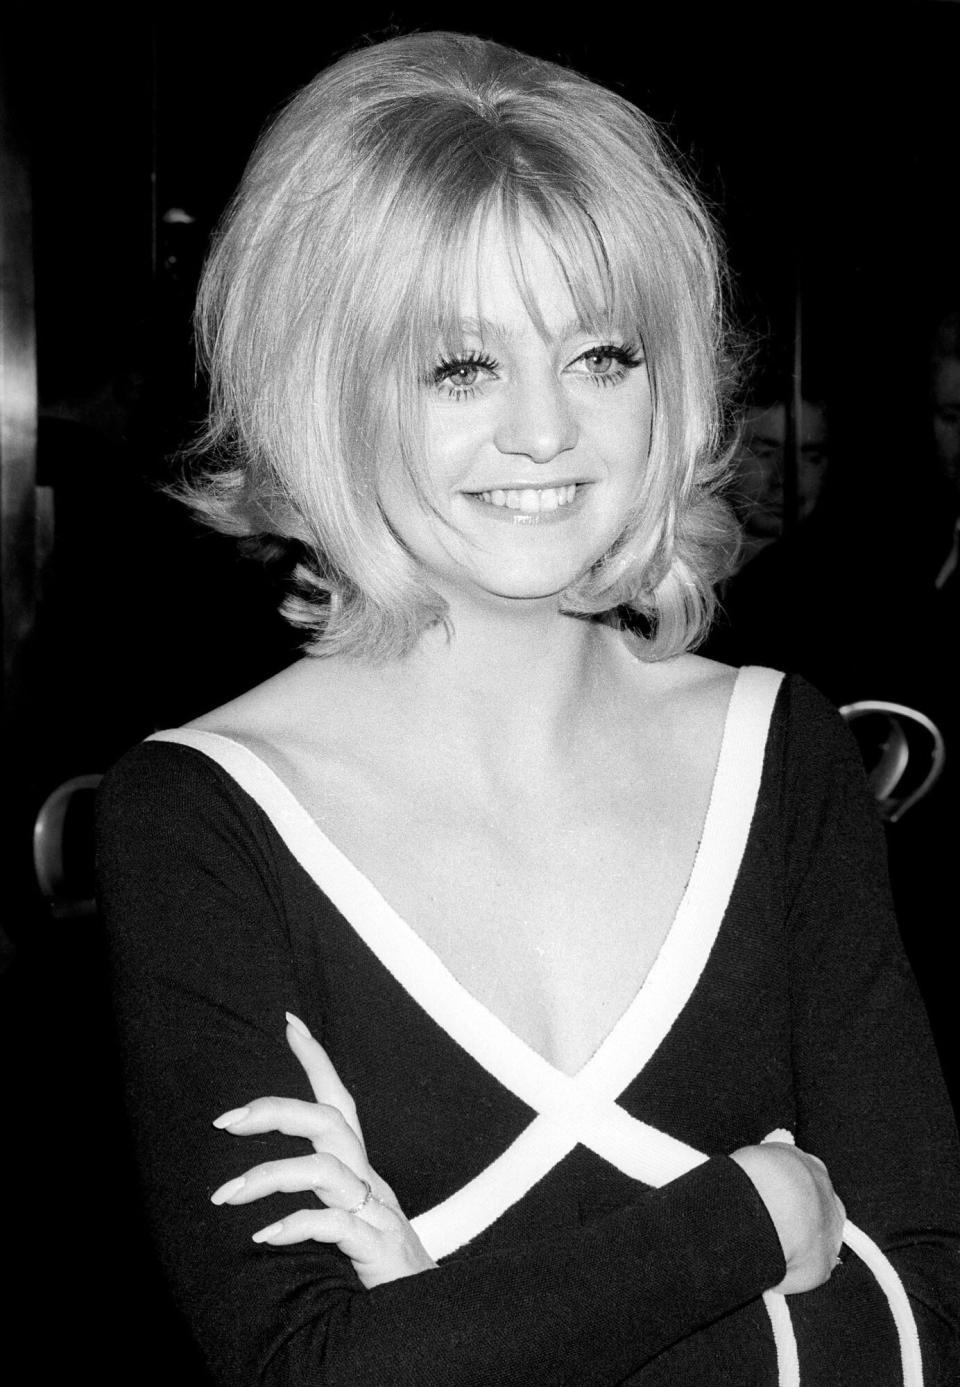 Goldie Hawn attends the film premiere of Cactus Flower on March 12, 1970 in London